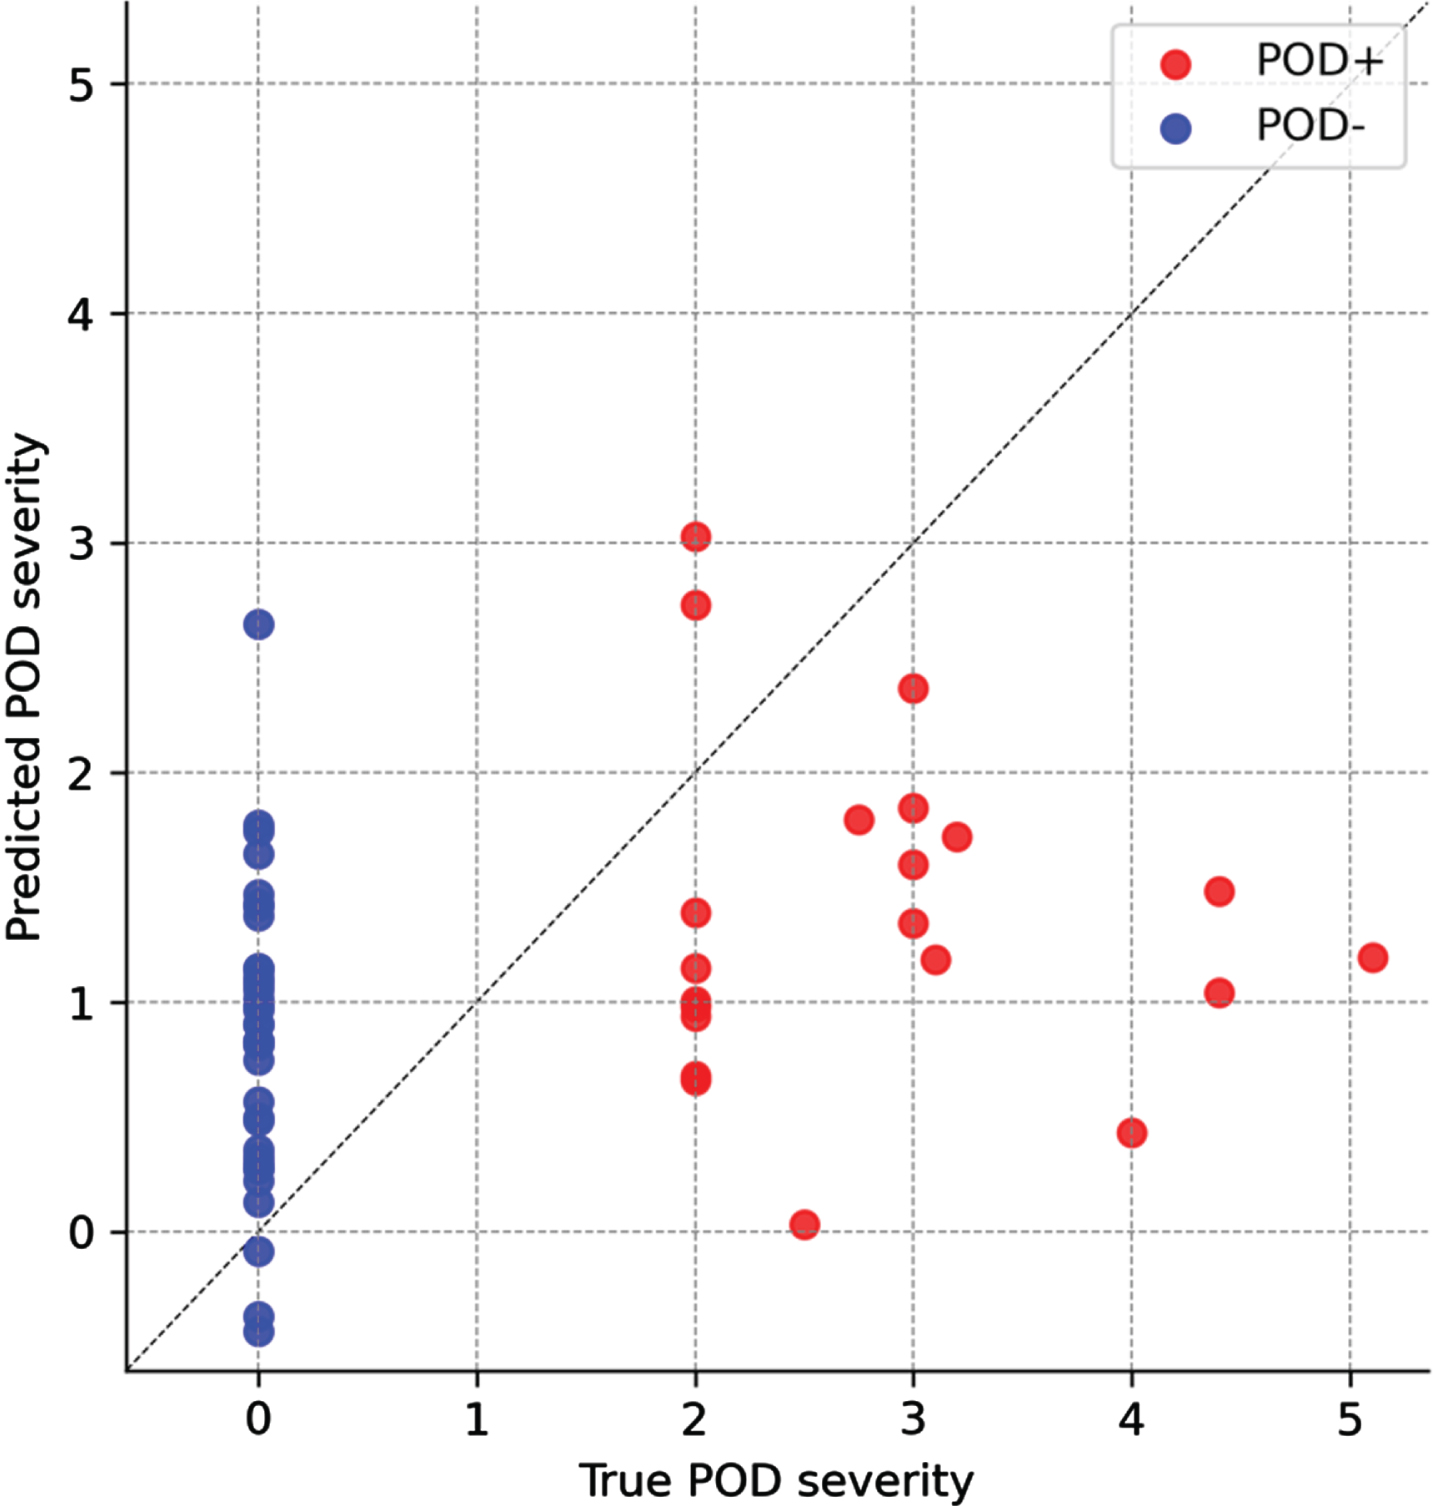 Correlation between true and predicted POD severity from the regularized regression. POD+ (red) and POD– (blue). For illustration purposes of the model fit, an x = y line was plotted.